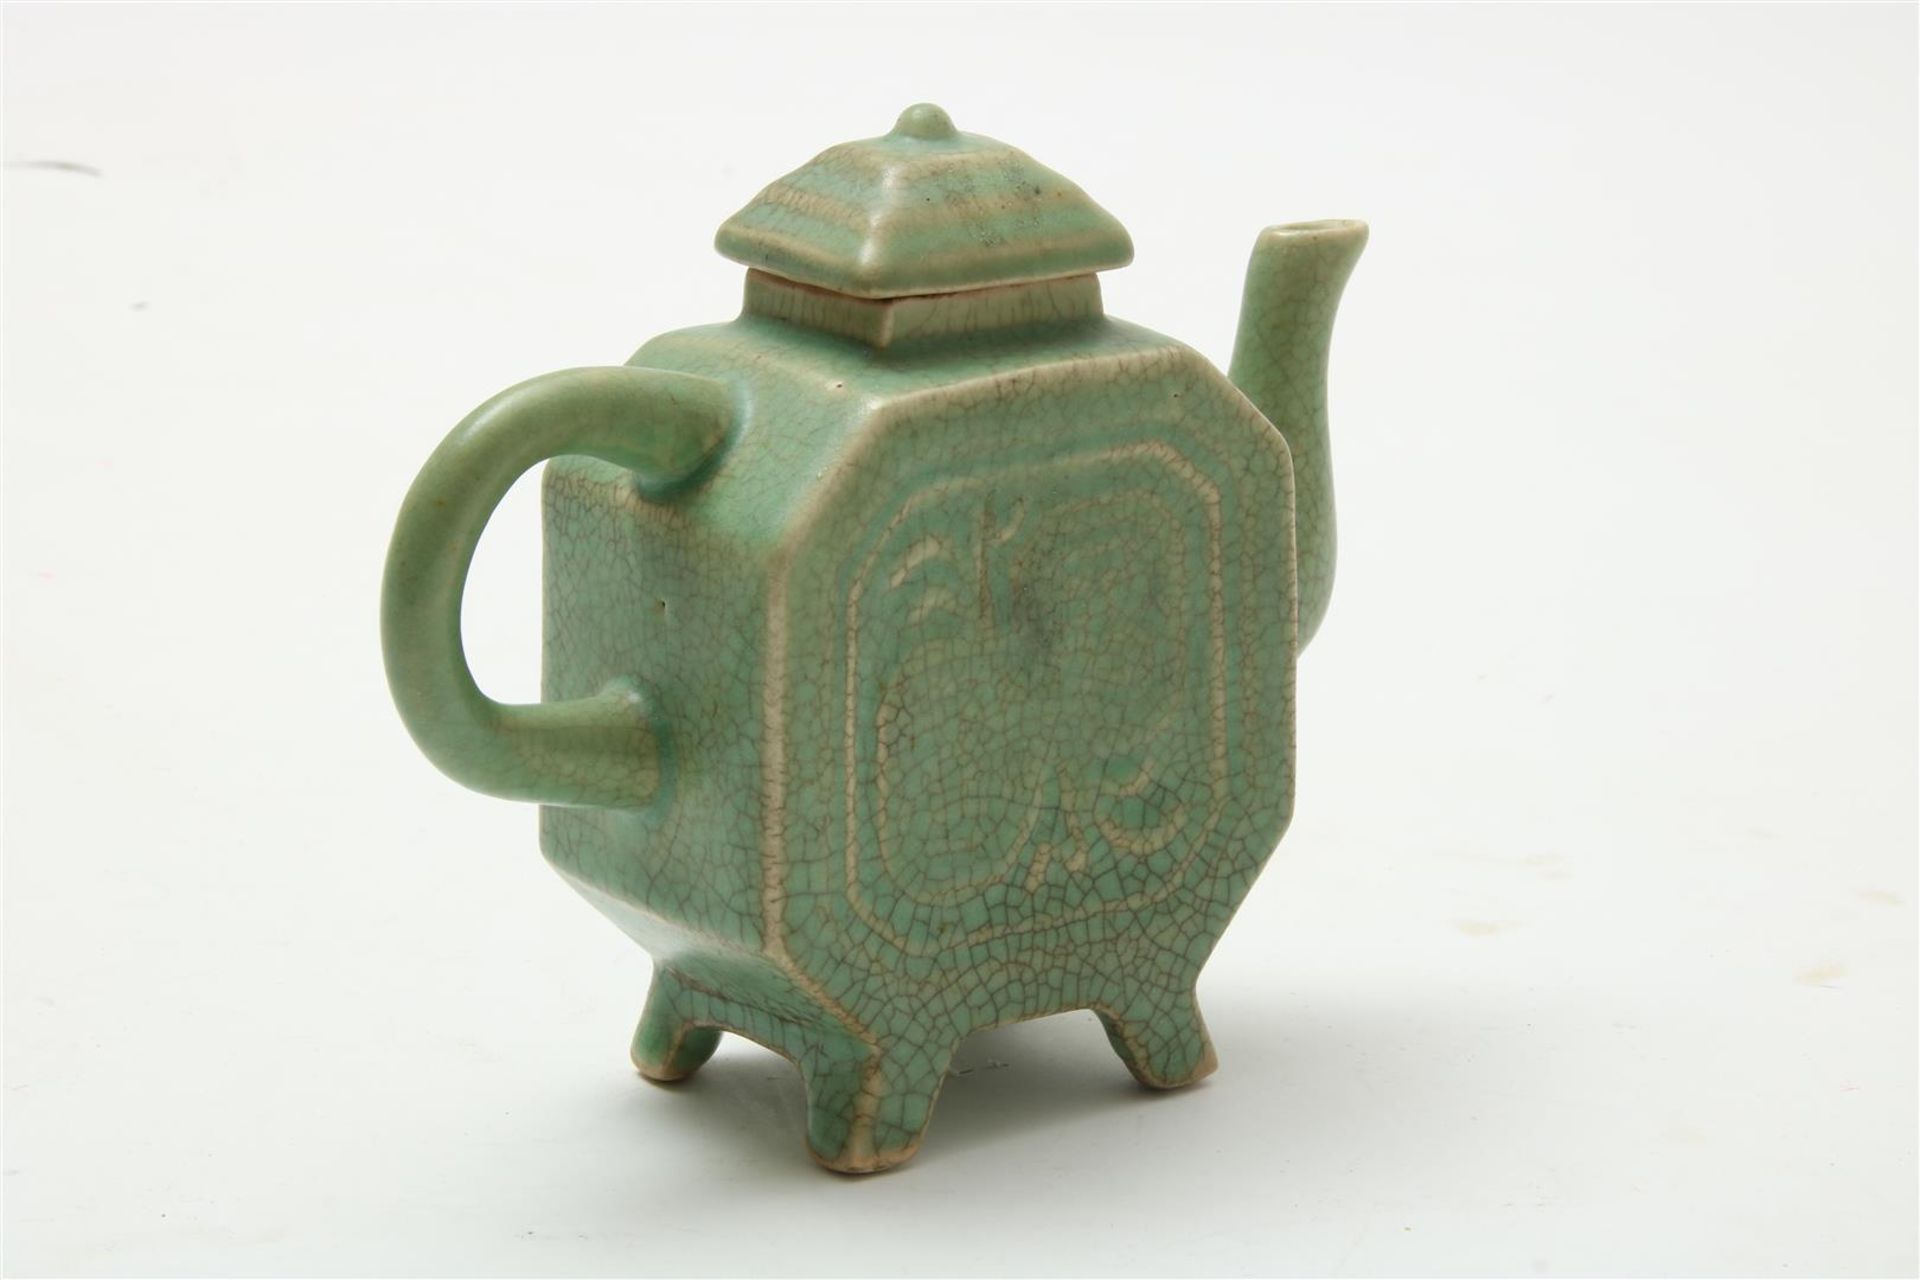 Porcelain teapot with celadon glaze and relief decor, 19th/20th century, h. 15 cm. - Image 2 of 3